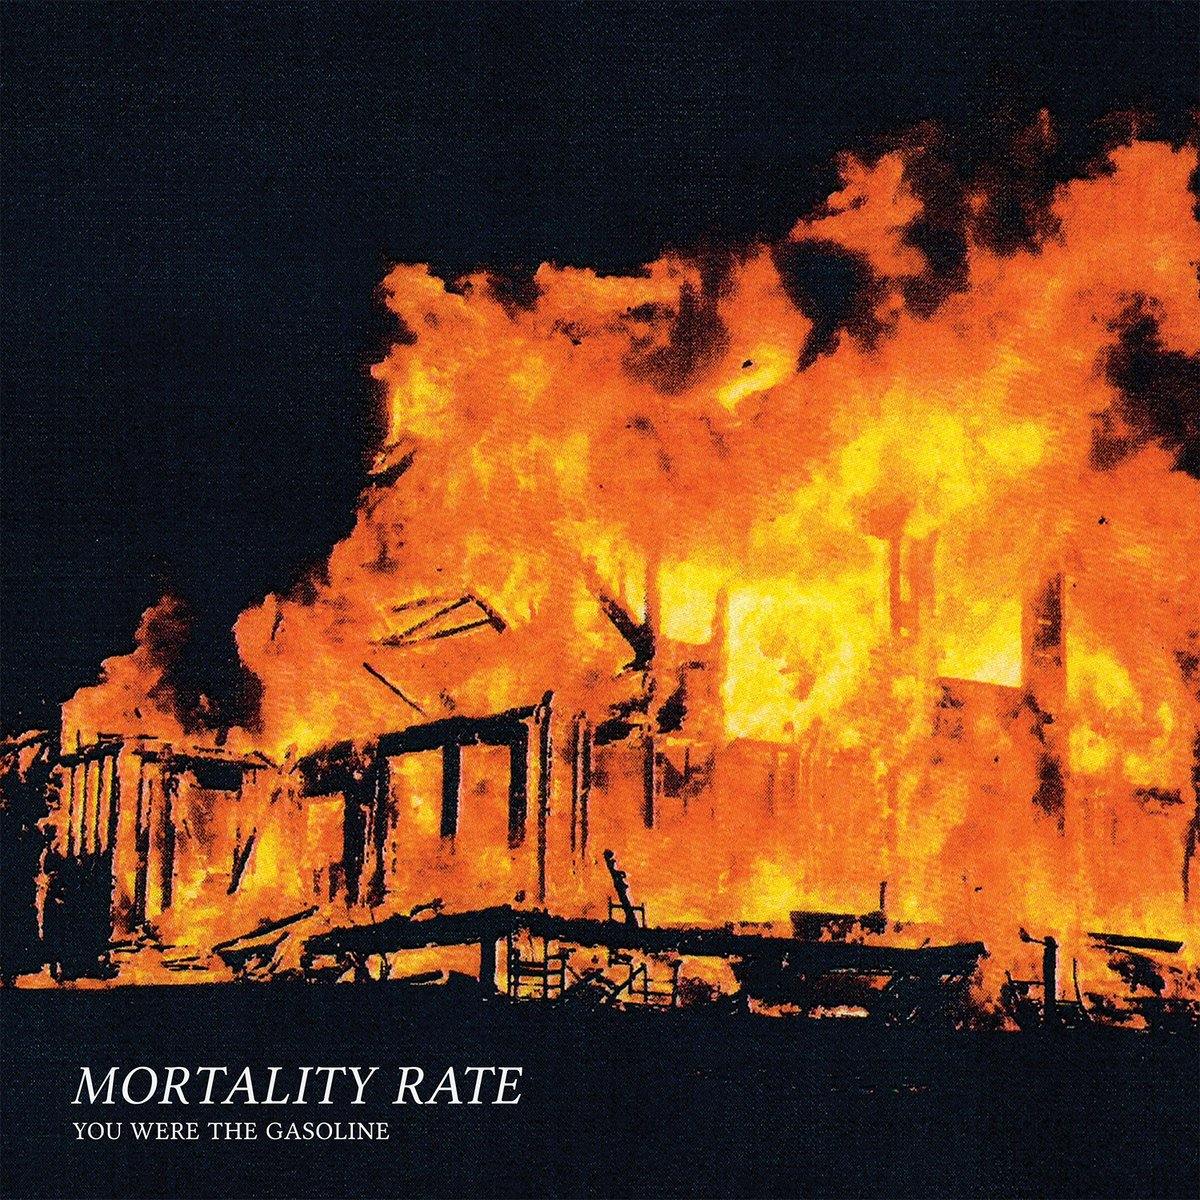 Buy – Mortality Rate "You Were the Gasoline" 7" – Band & Music Merch – Cold Cuts Merch